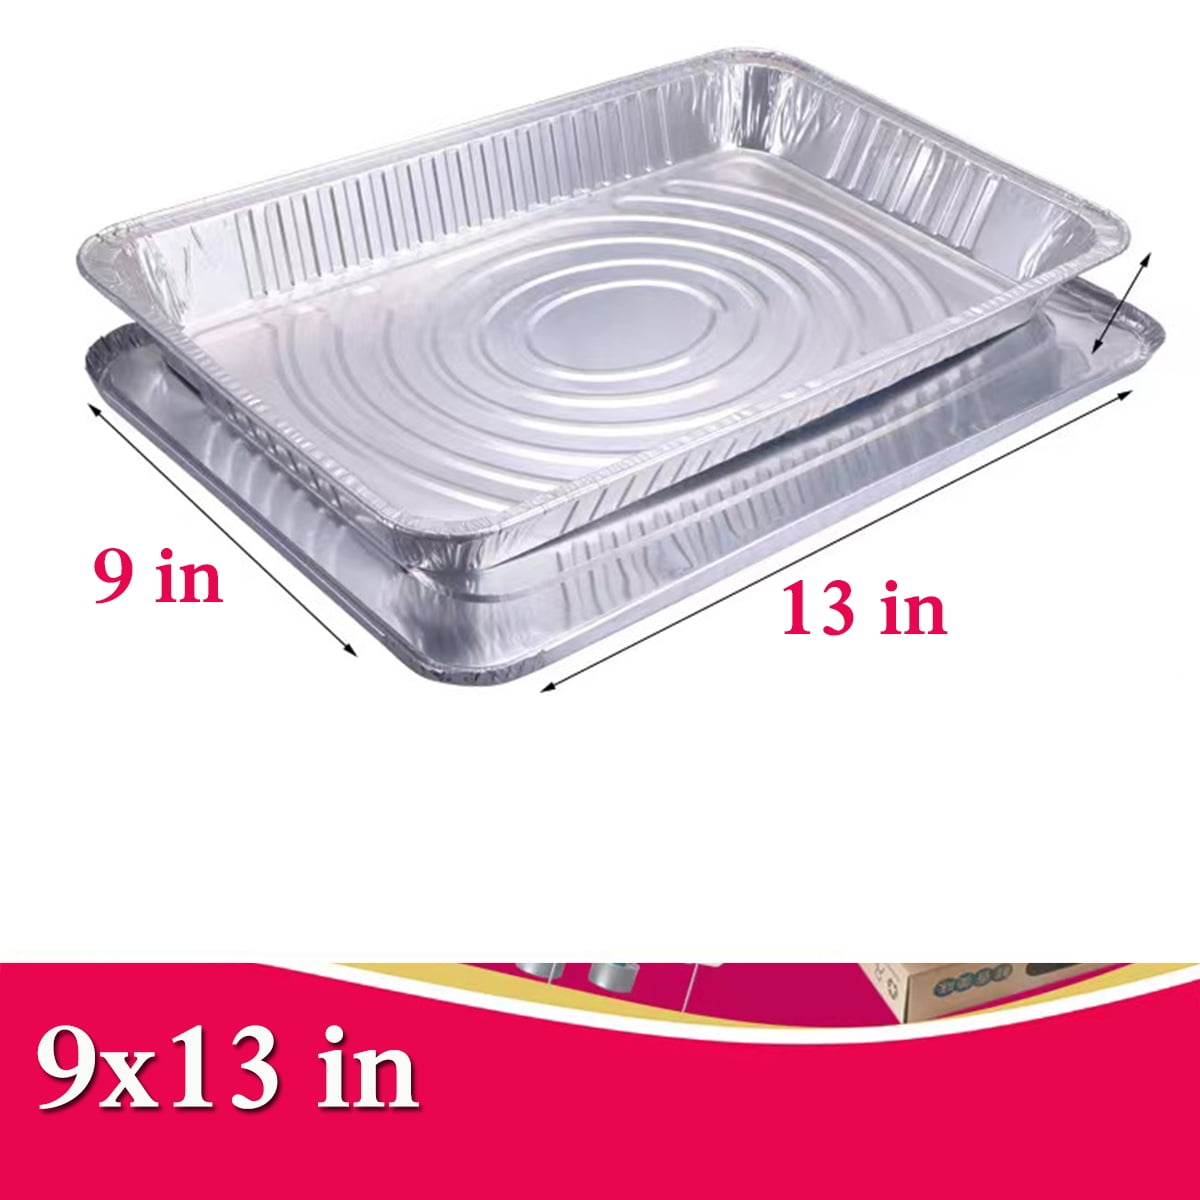 MontoPack Aluminum Foil Pans Half Size Roasting Chafing Pan | Bulk 10 Pack  of 9x13 Tins for Cooking, Baking & Catering | Heavy Duty Disposable